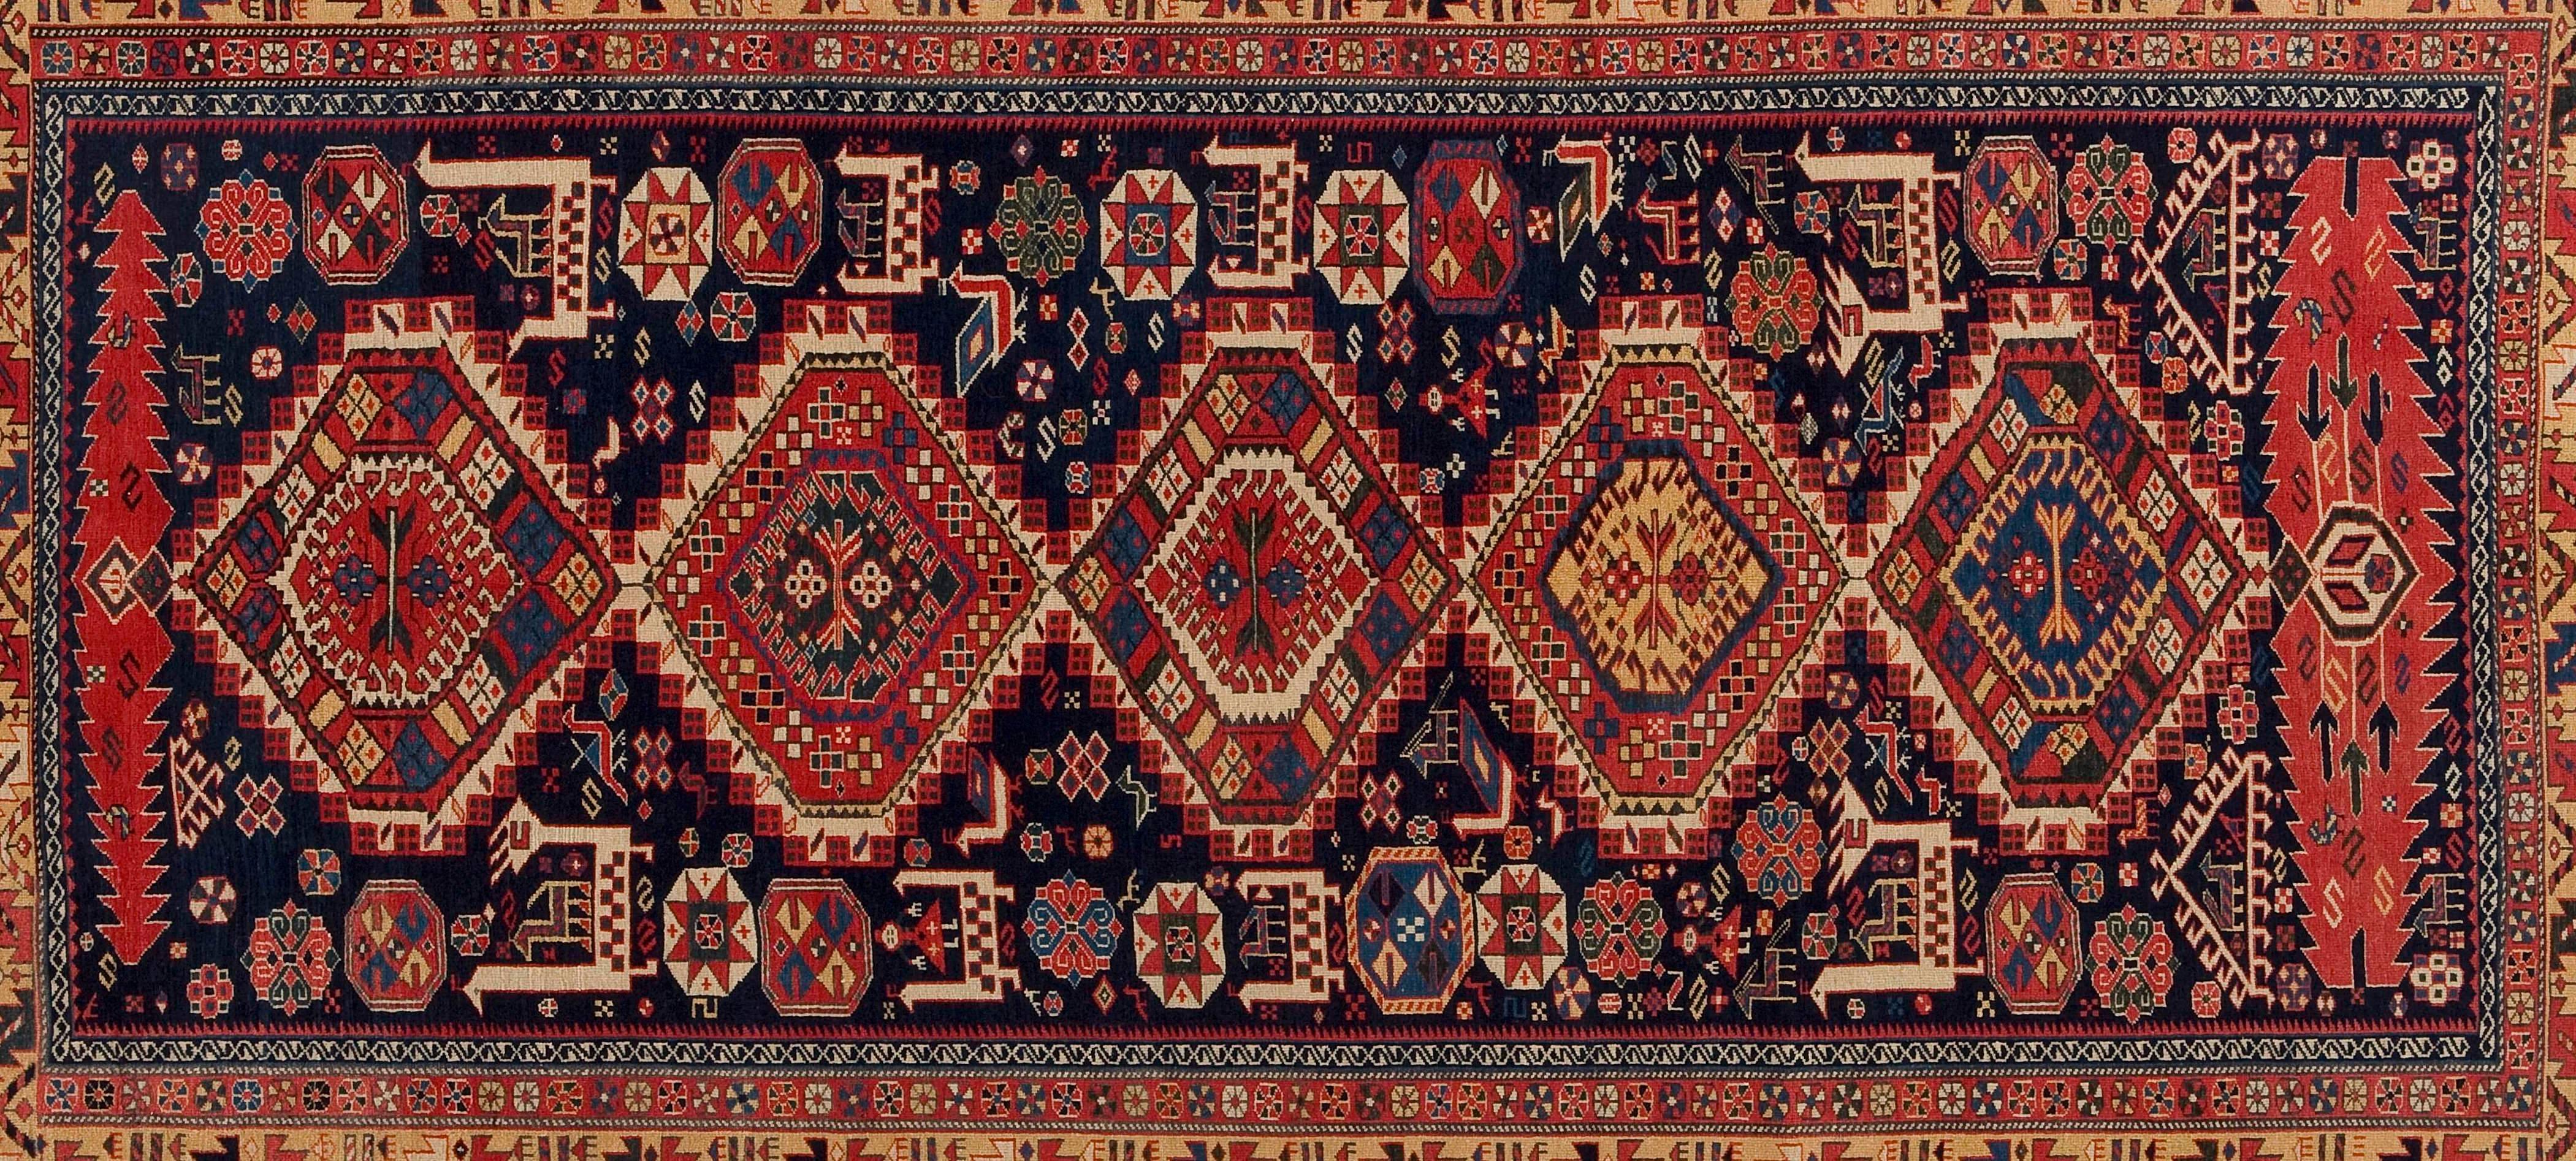 This Antique Bokhara Russian piece has at least 70 years old and represent some of the very finest examples of art from the time and place from which they originate. The complex methods and high-quality ingredients employed by the master rug makers